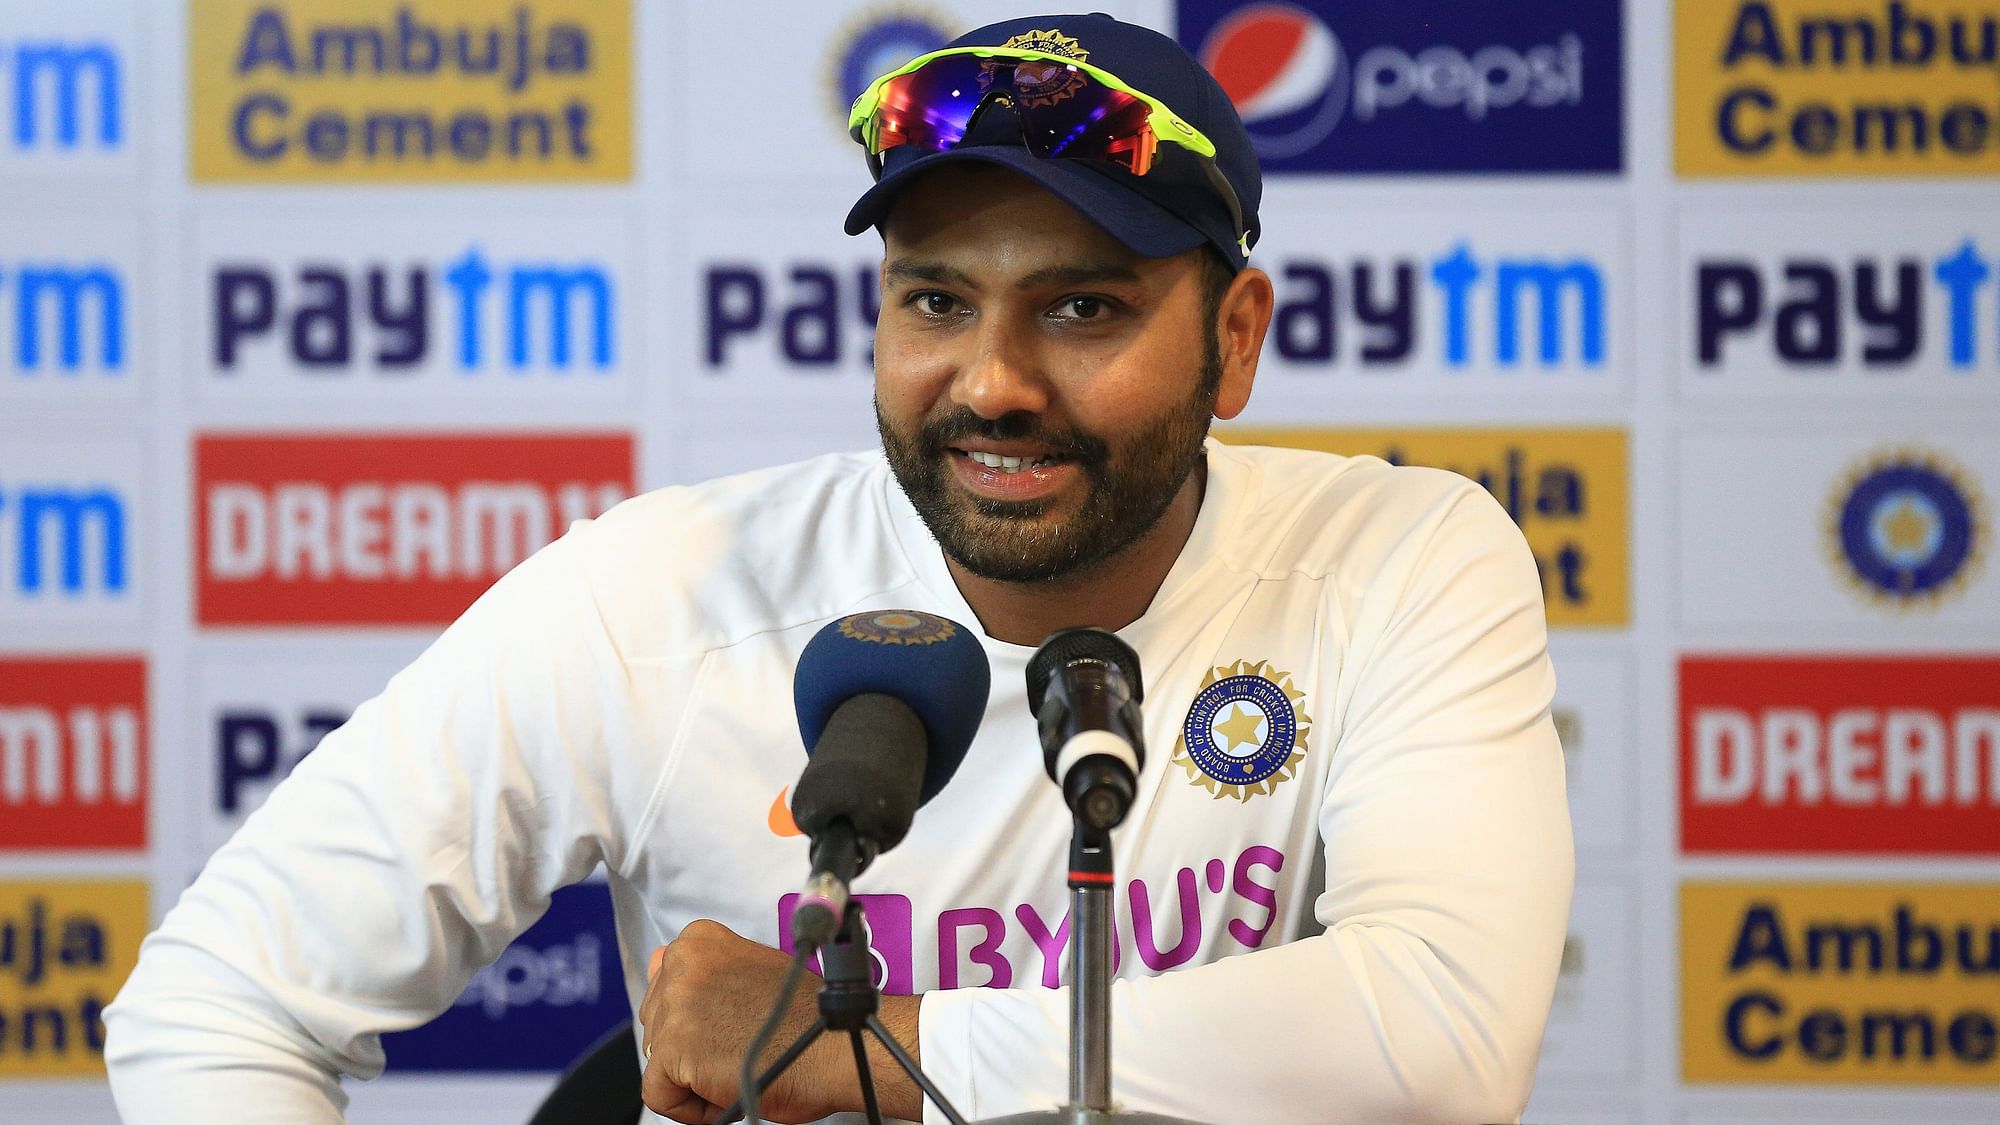 Rohit Sharma at the post-match press conference after India’s 203-run win over South Africa.